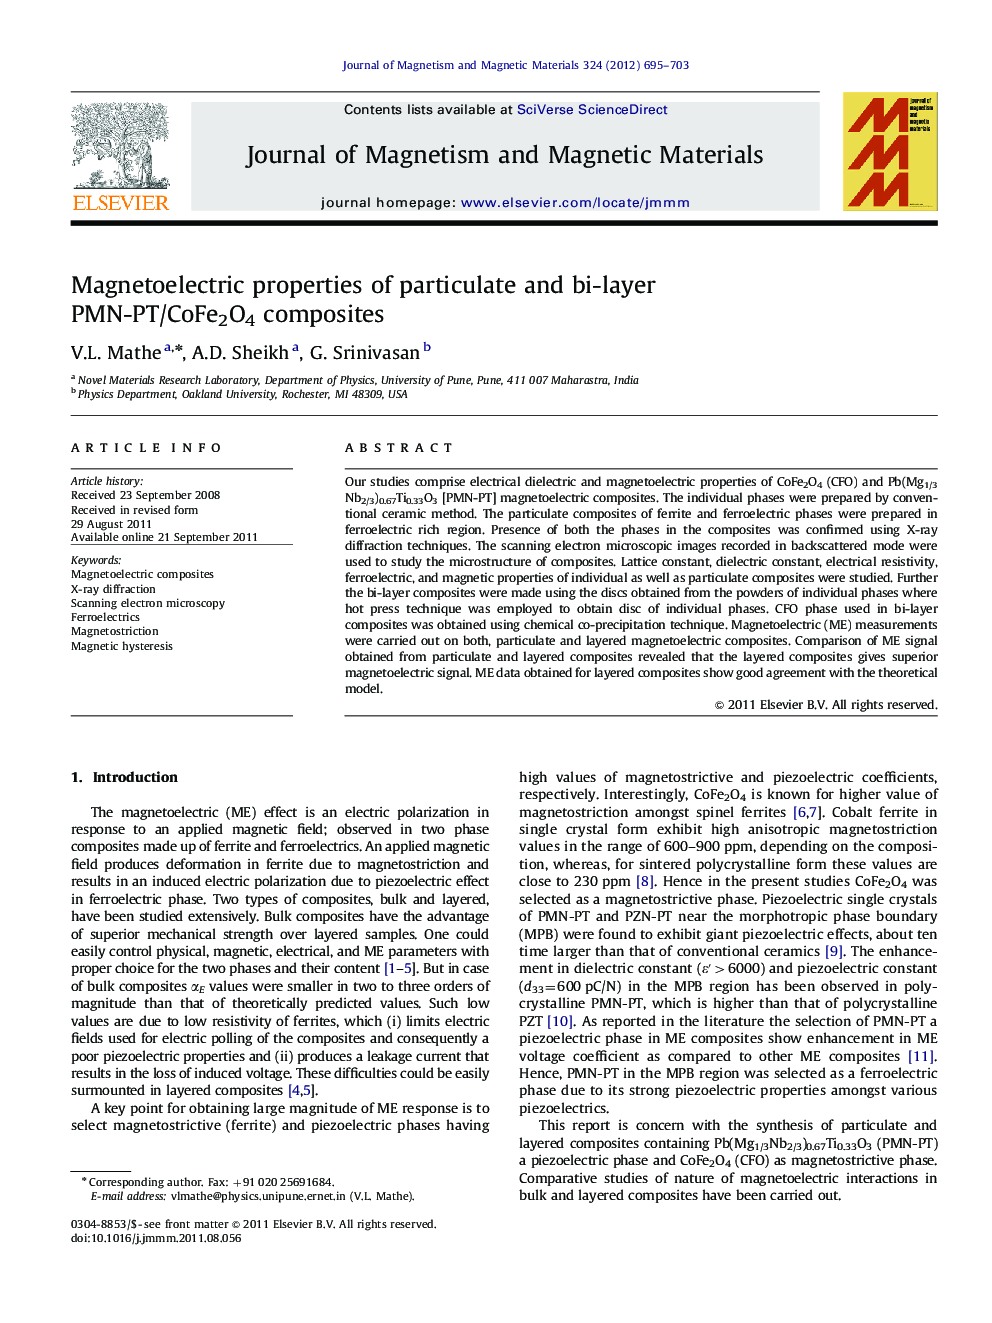 Magnetoelectric properties of particulate and bi-layer PMN-PT/CoFe2O4 composites